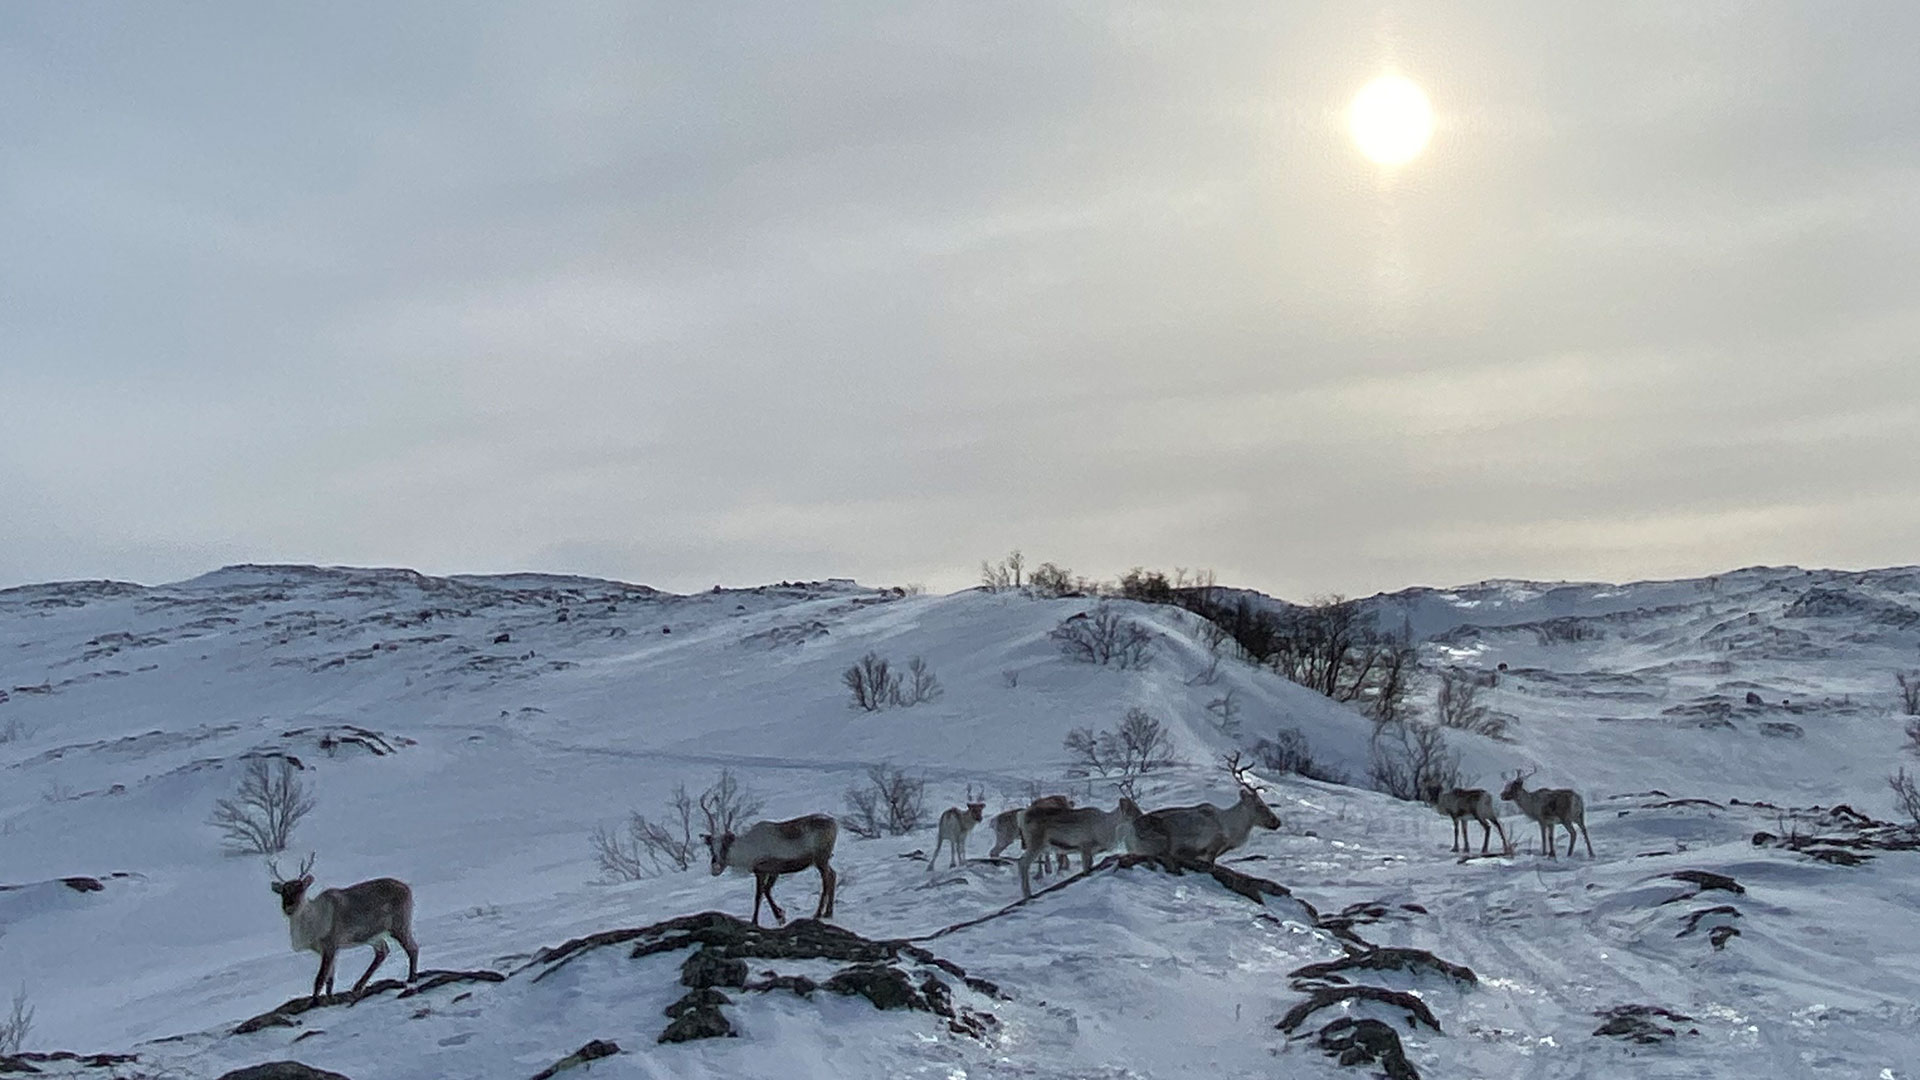 Reindeer walking across snowy landscape with sun shining above them